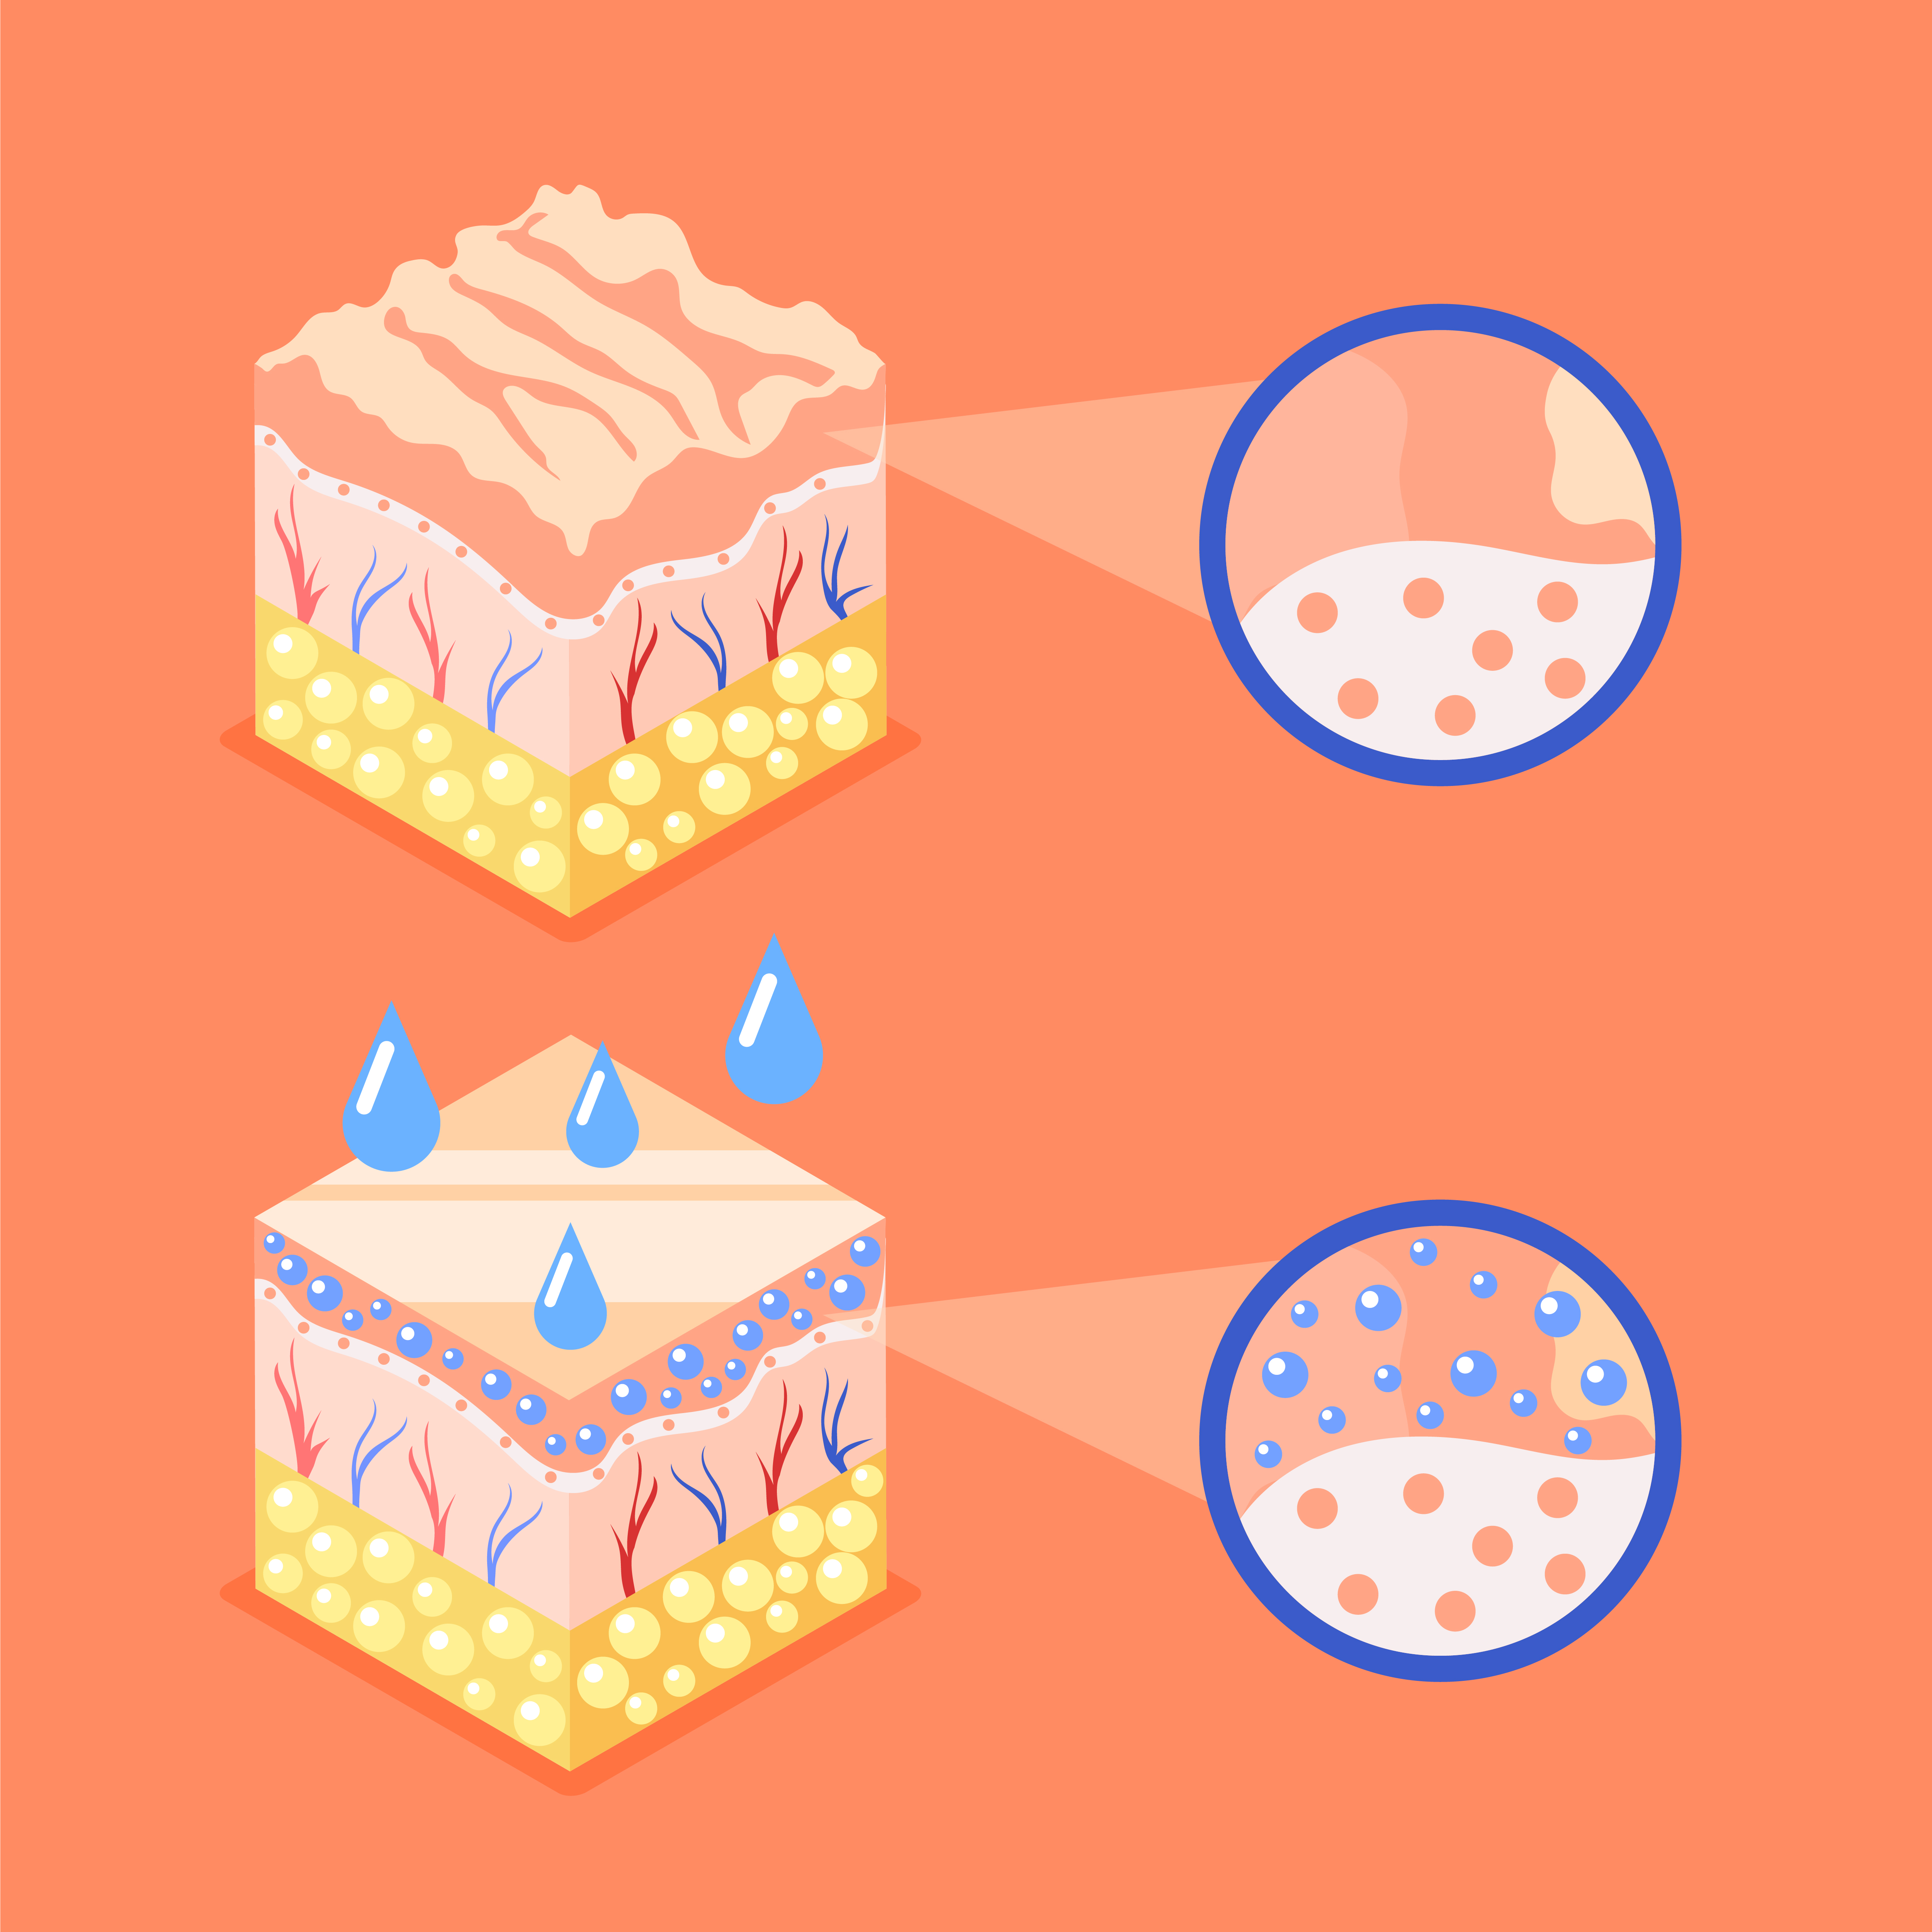 2 animated cut outs of dry and hydrated skin